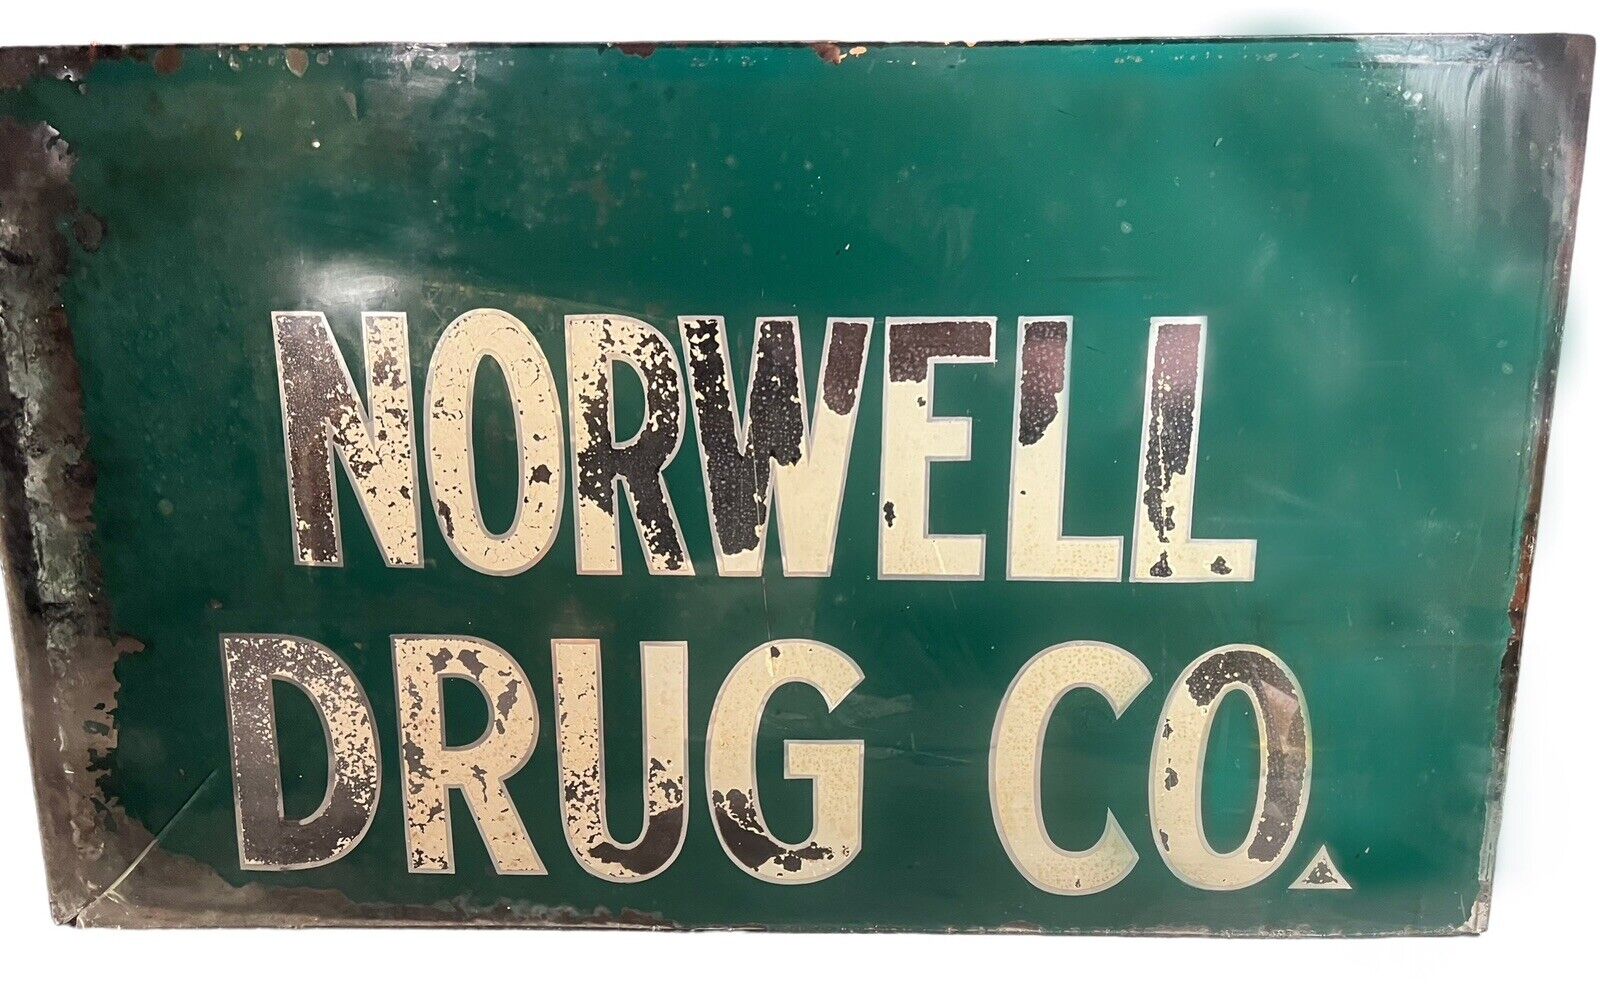 Vintage 1950’s ‘Norwell Drug Co.’ Reverse Painted Glass Store Sign Advertisment